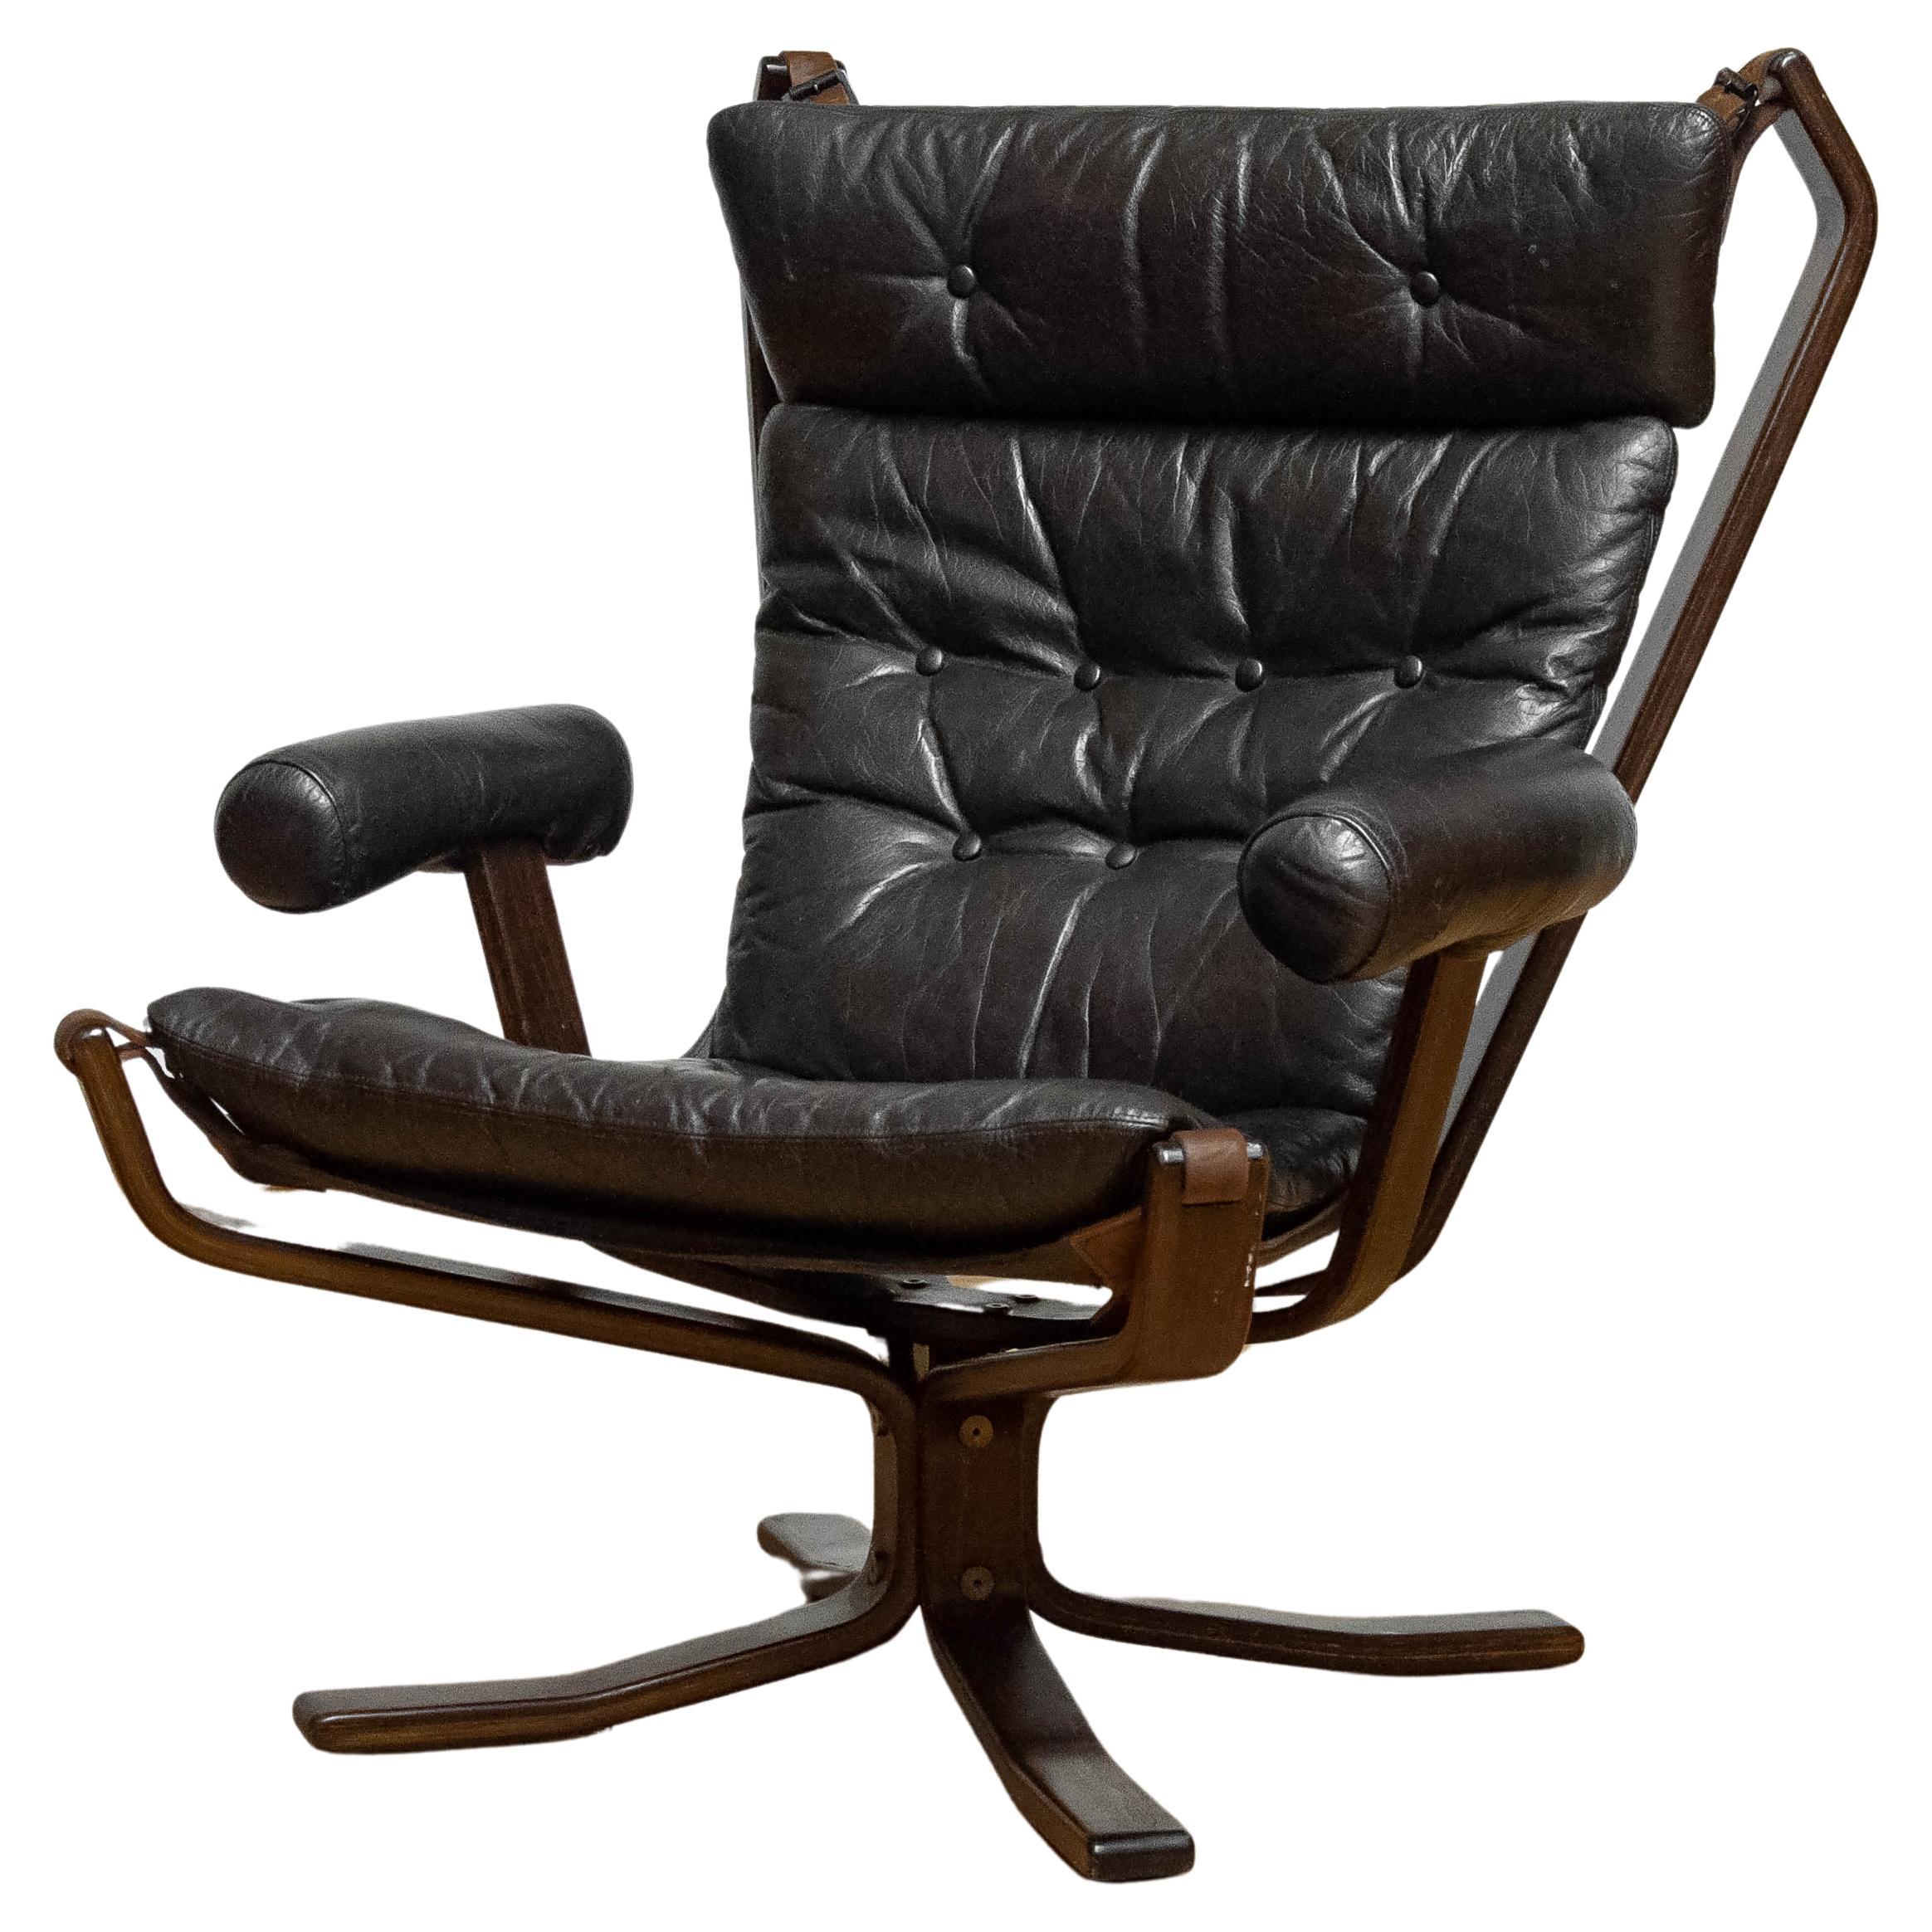 1970s Brown Leather Lounge Chair 'Superstar" by Sigurd Ressell for Trygg Mobler. For Sale